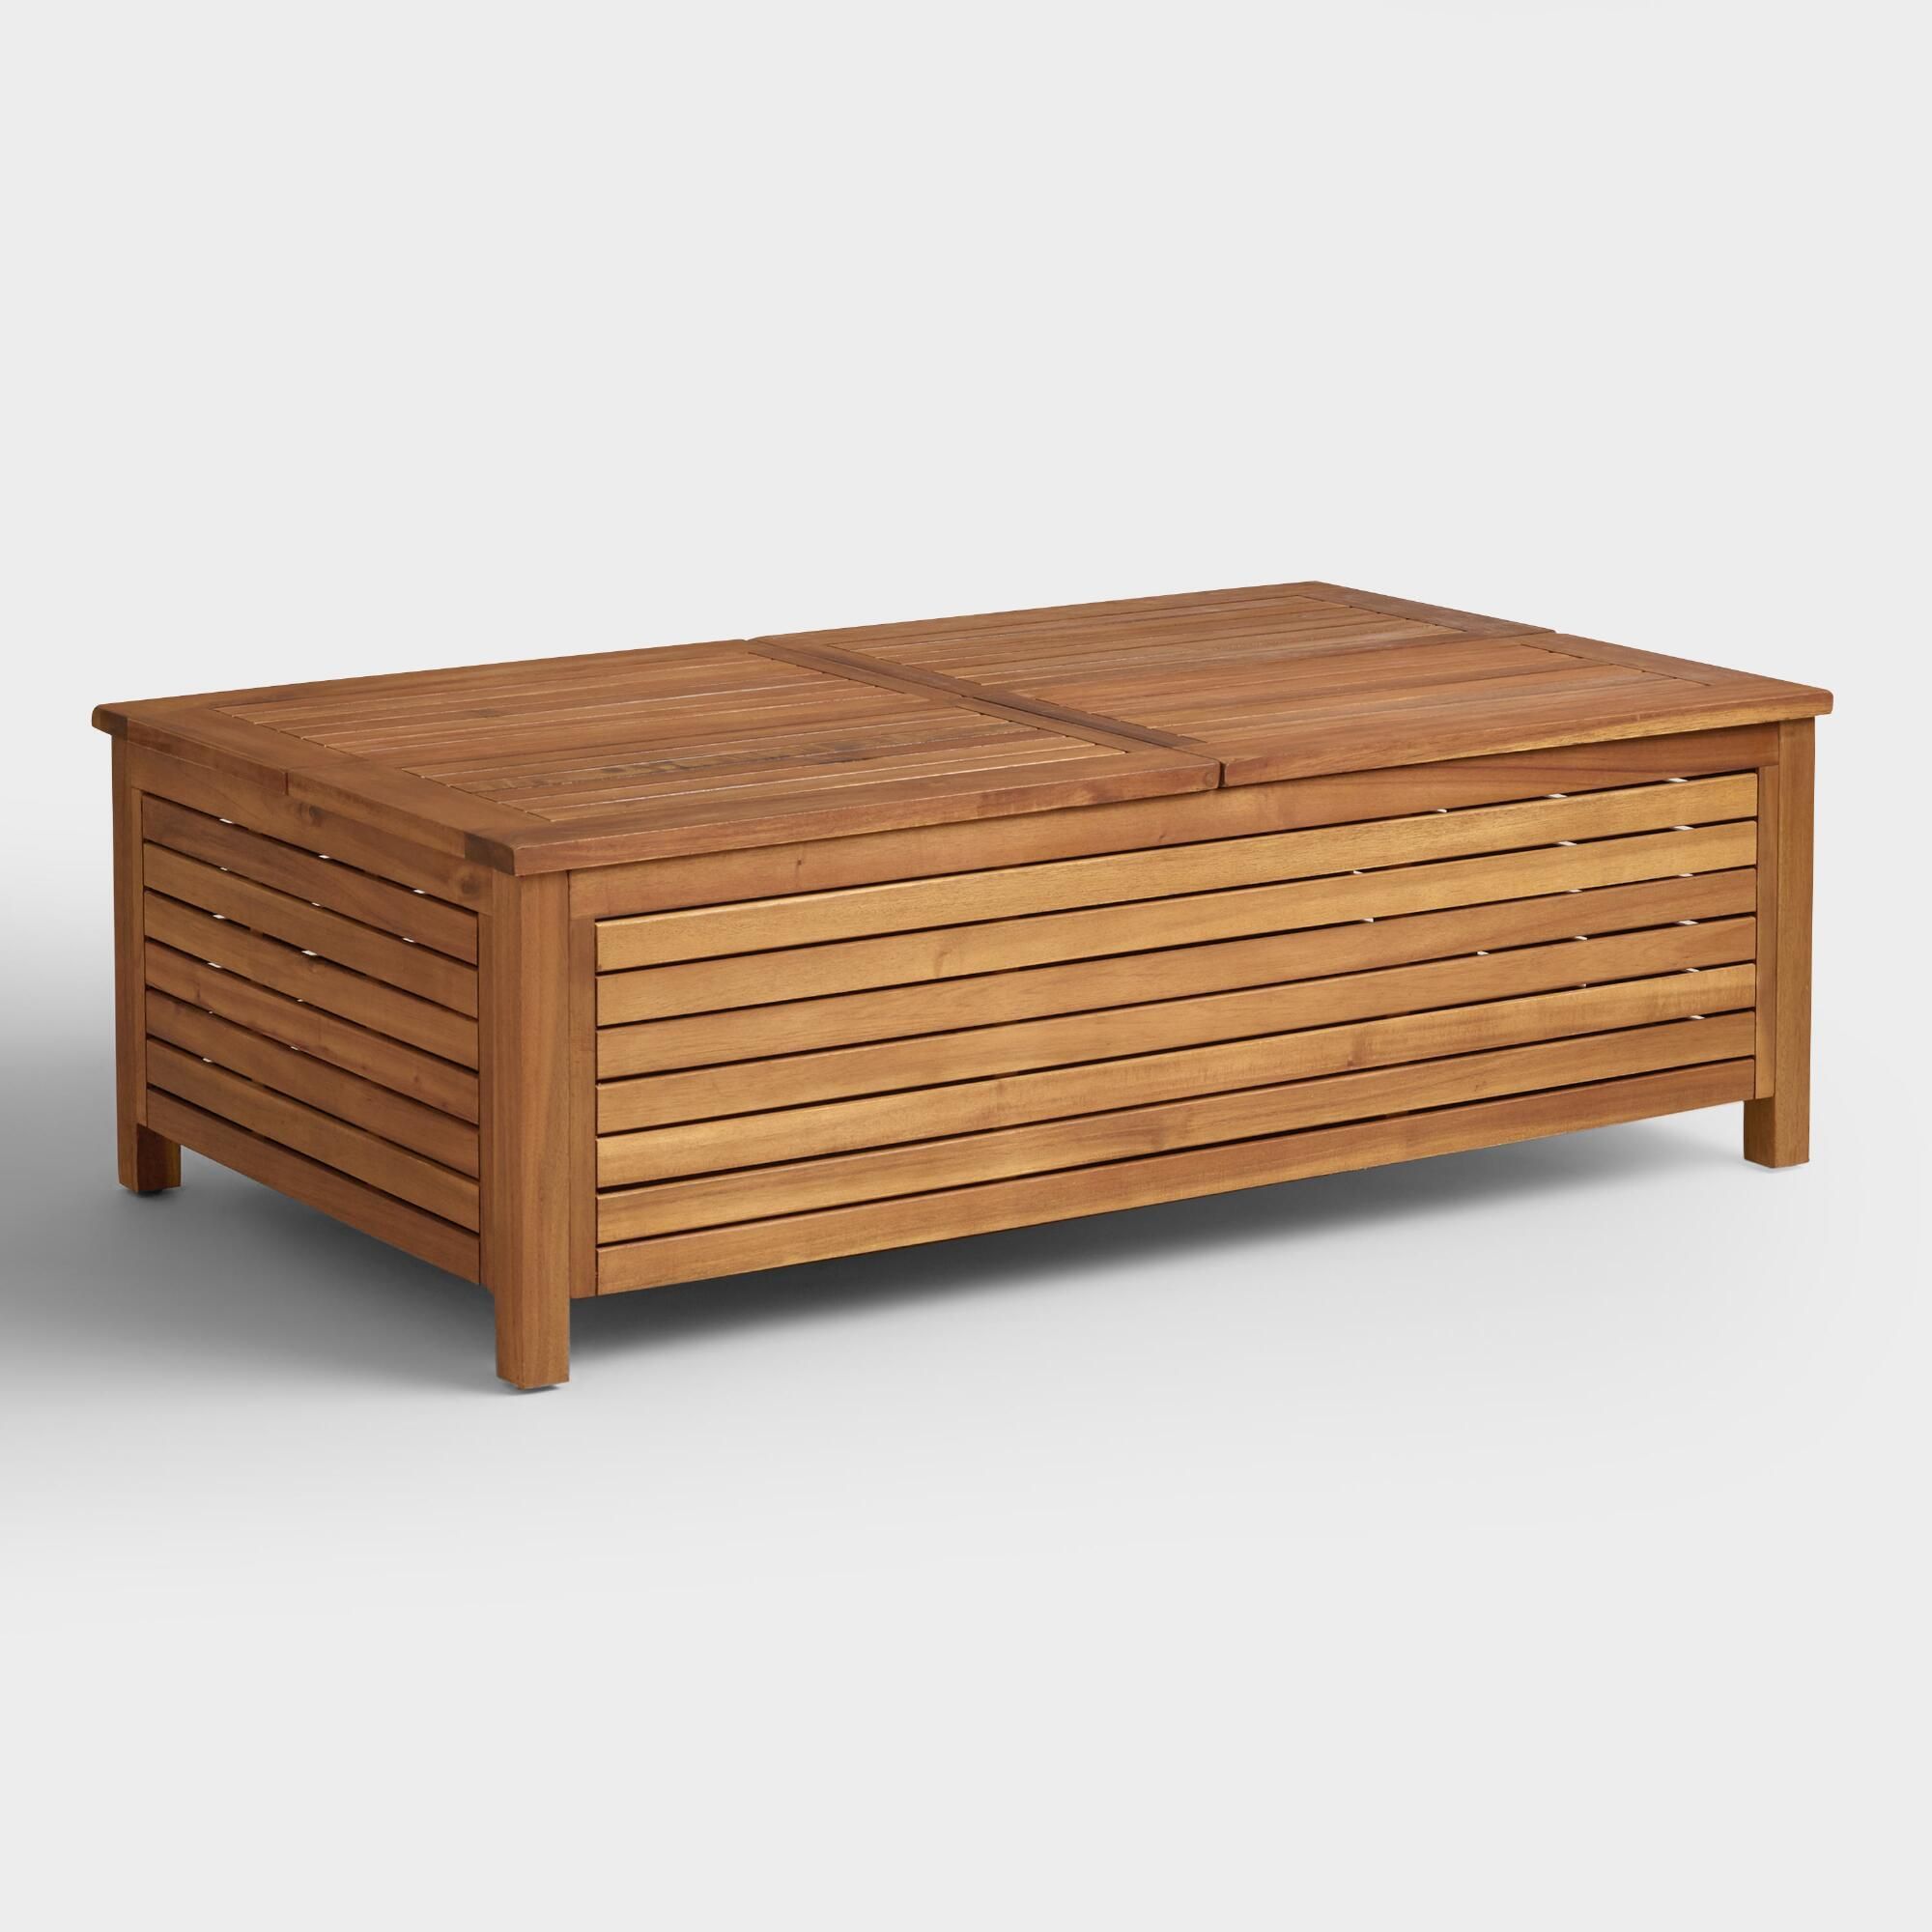 The Bold Beauty Of Our Occasional Collection Comes From Solid Acacia Regarding Outdoor Coffee Tables With Storage (Gallery 5 of 20)